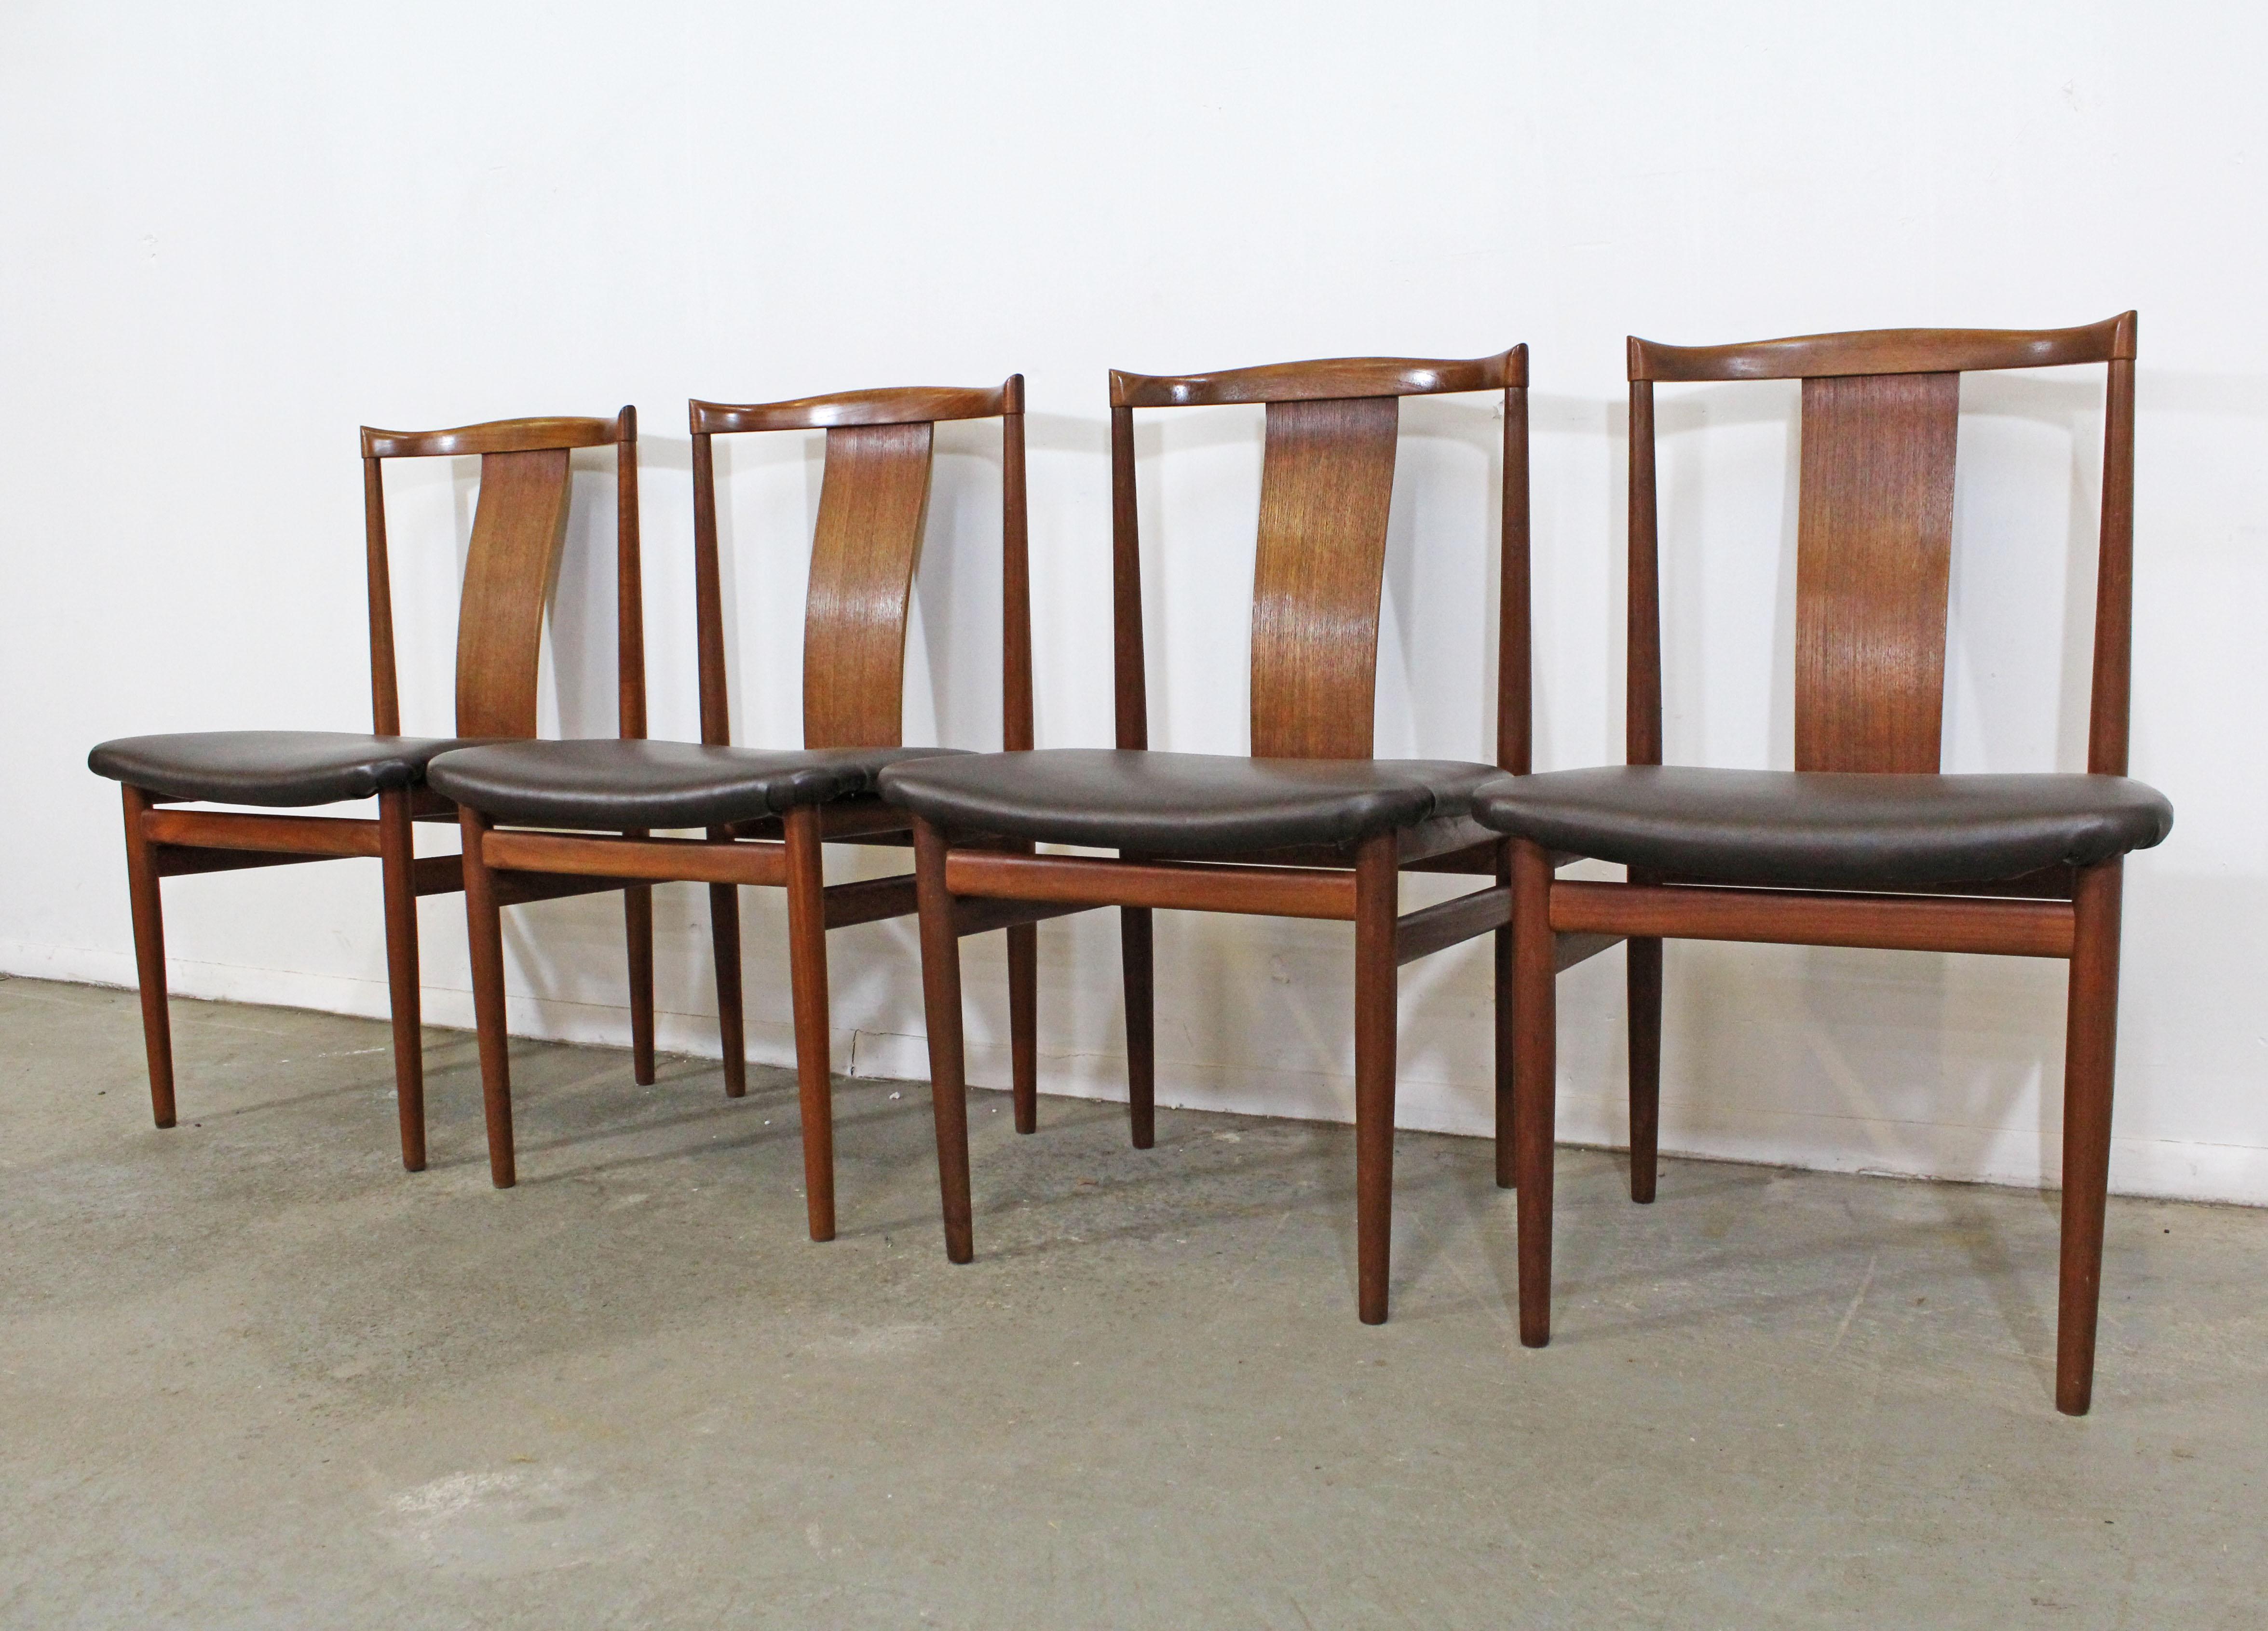 What a find. Offered is a Danish modern set of 4 teak dining chairs. This set includes 4 side chairs that are made teak with vinyl upholstery. They are in good vintage condition, showing slight age wear. They are not signed. 

Approximate